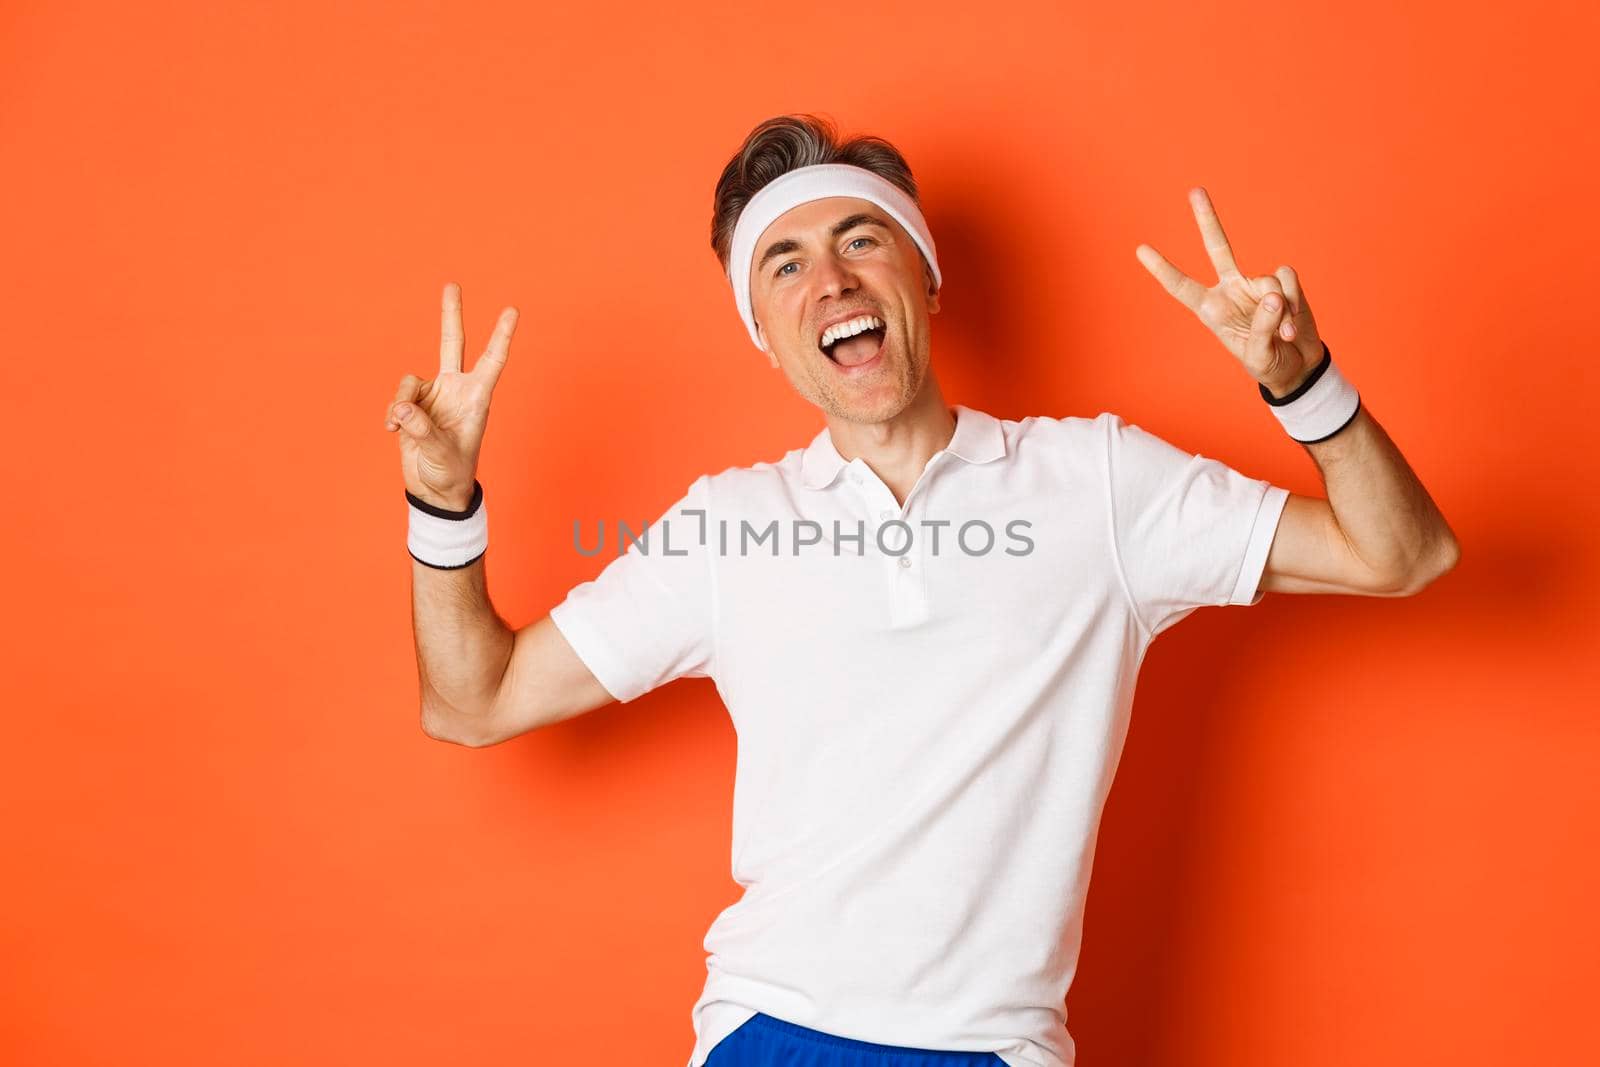 Image of happy and healthy middle-aged man in sport clothing, showing peace signs and smiling, workout over orange background.